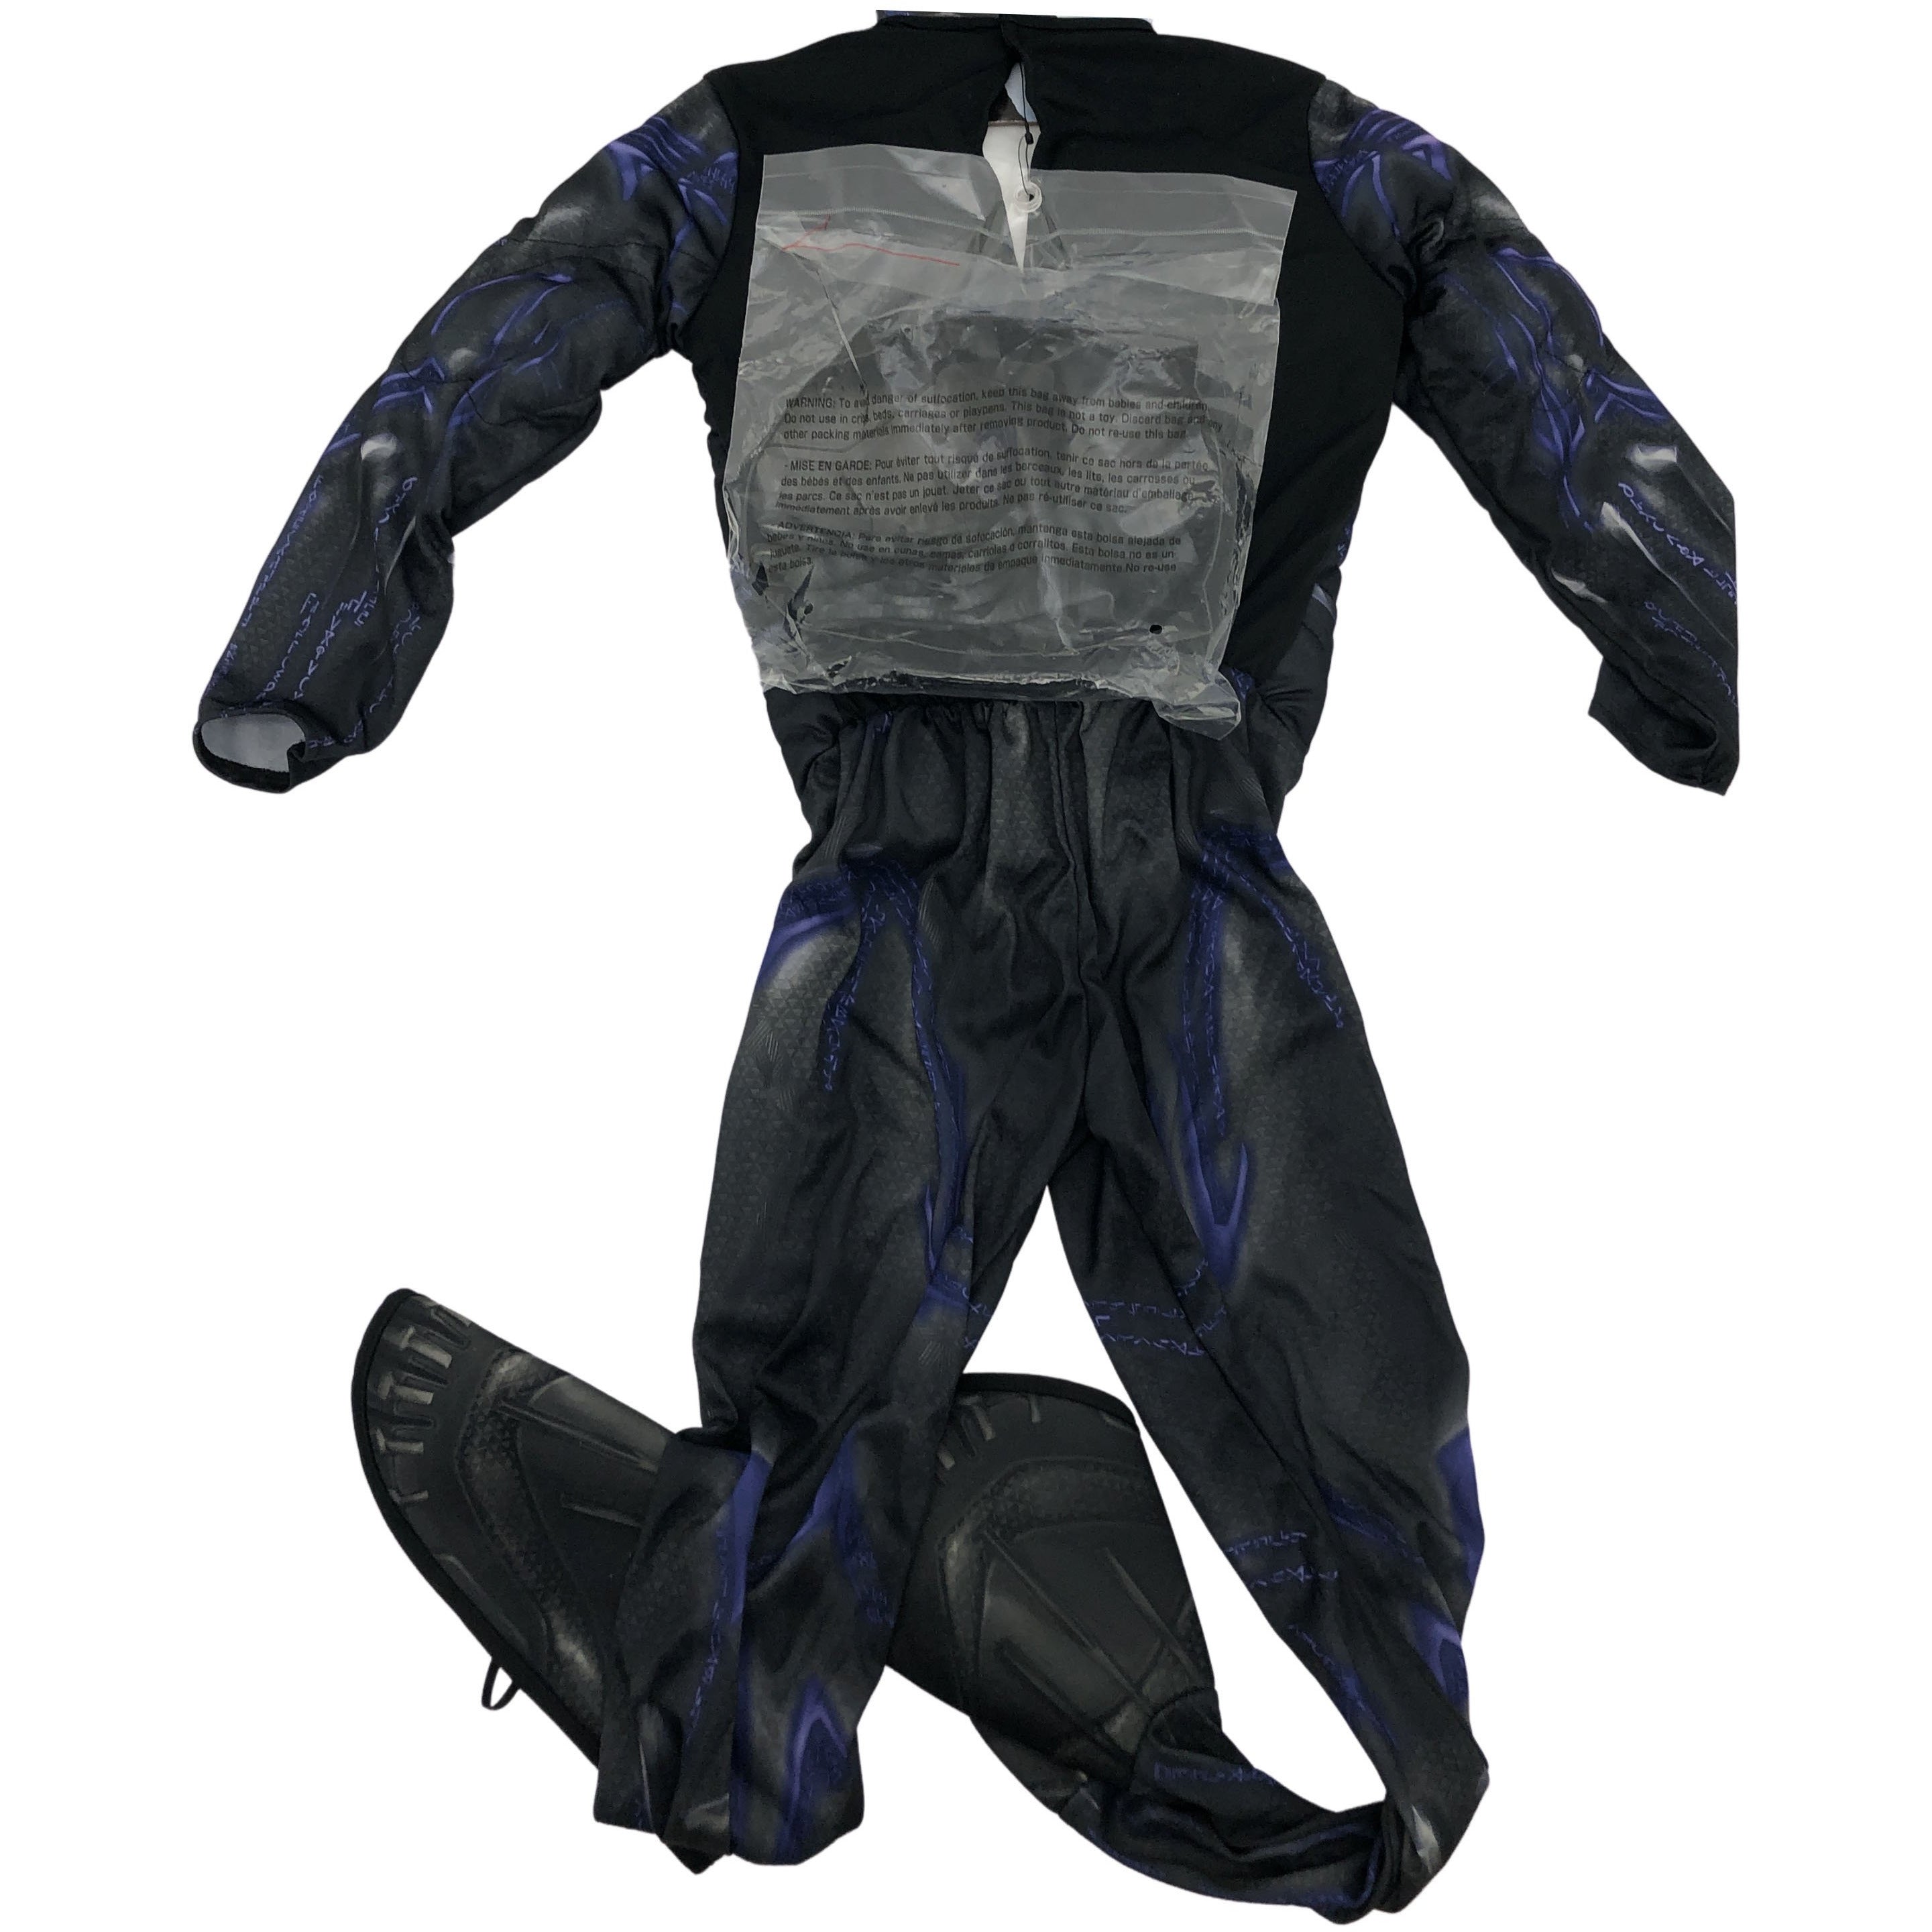 Rubies Black Panther Endgame Halloween Costume in size 7-8 with mask boot covers padded jumpsuit and gloves